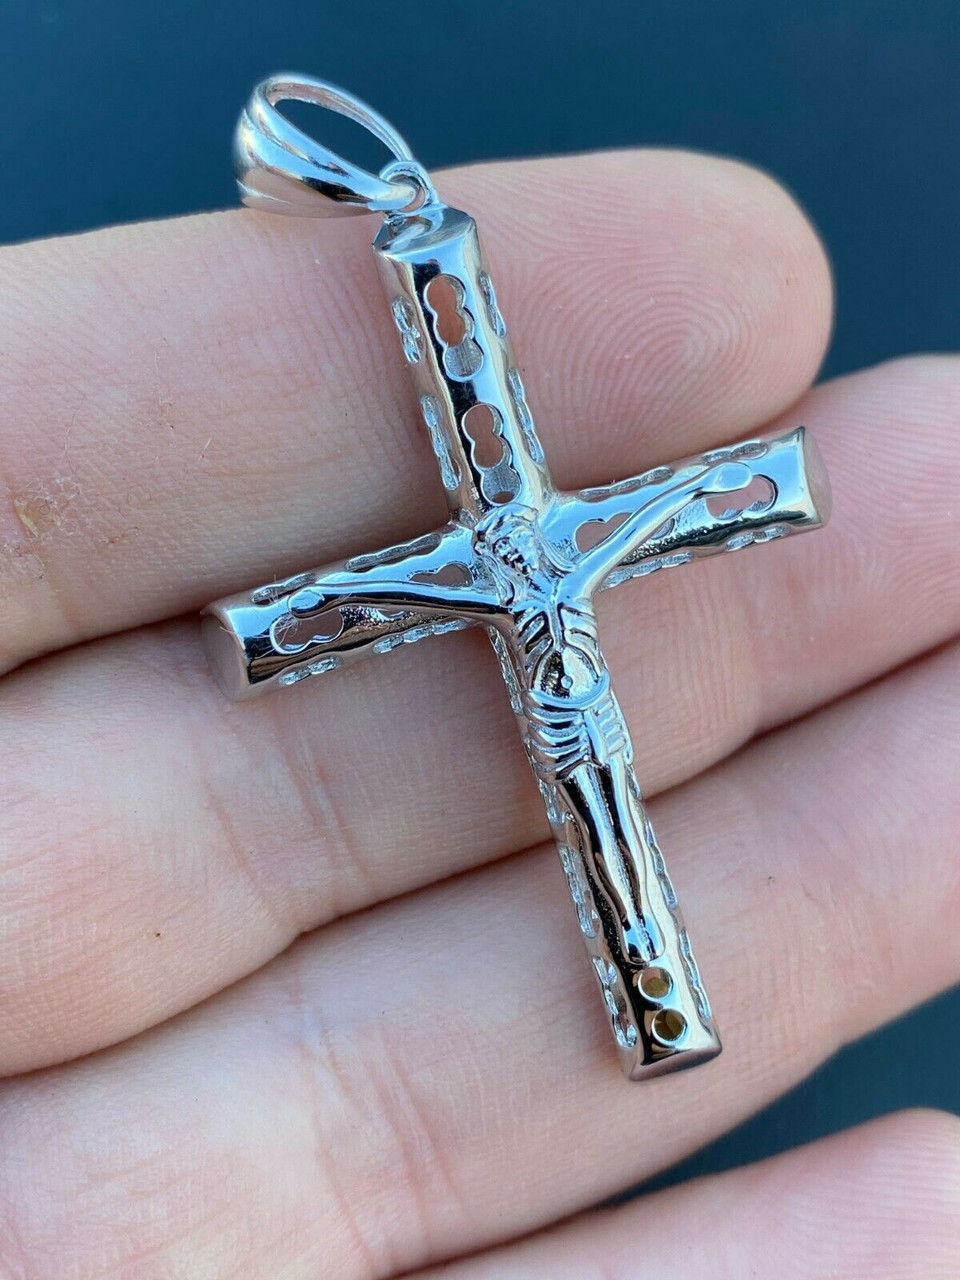 Real Solid 925 Sterling Silver Mens Cross Jesus Piece Crucifix Pendant  Necklace